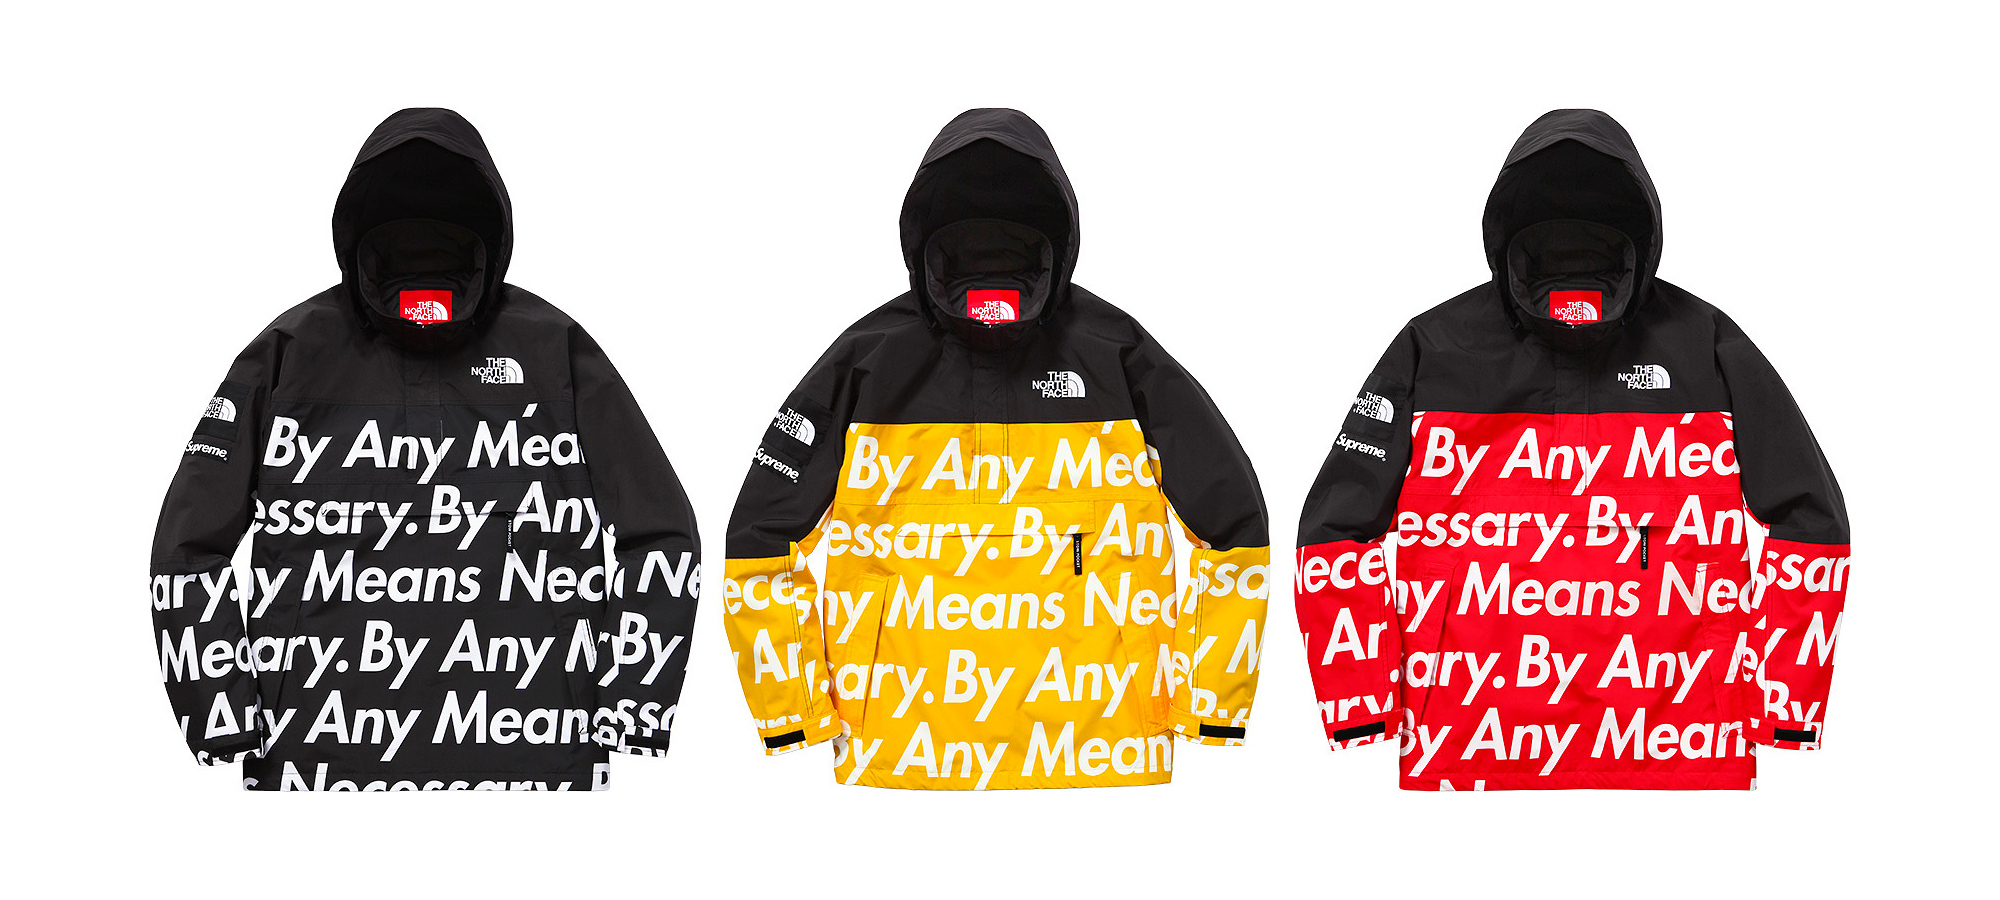 by any means necessary supreme